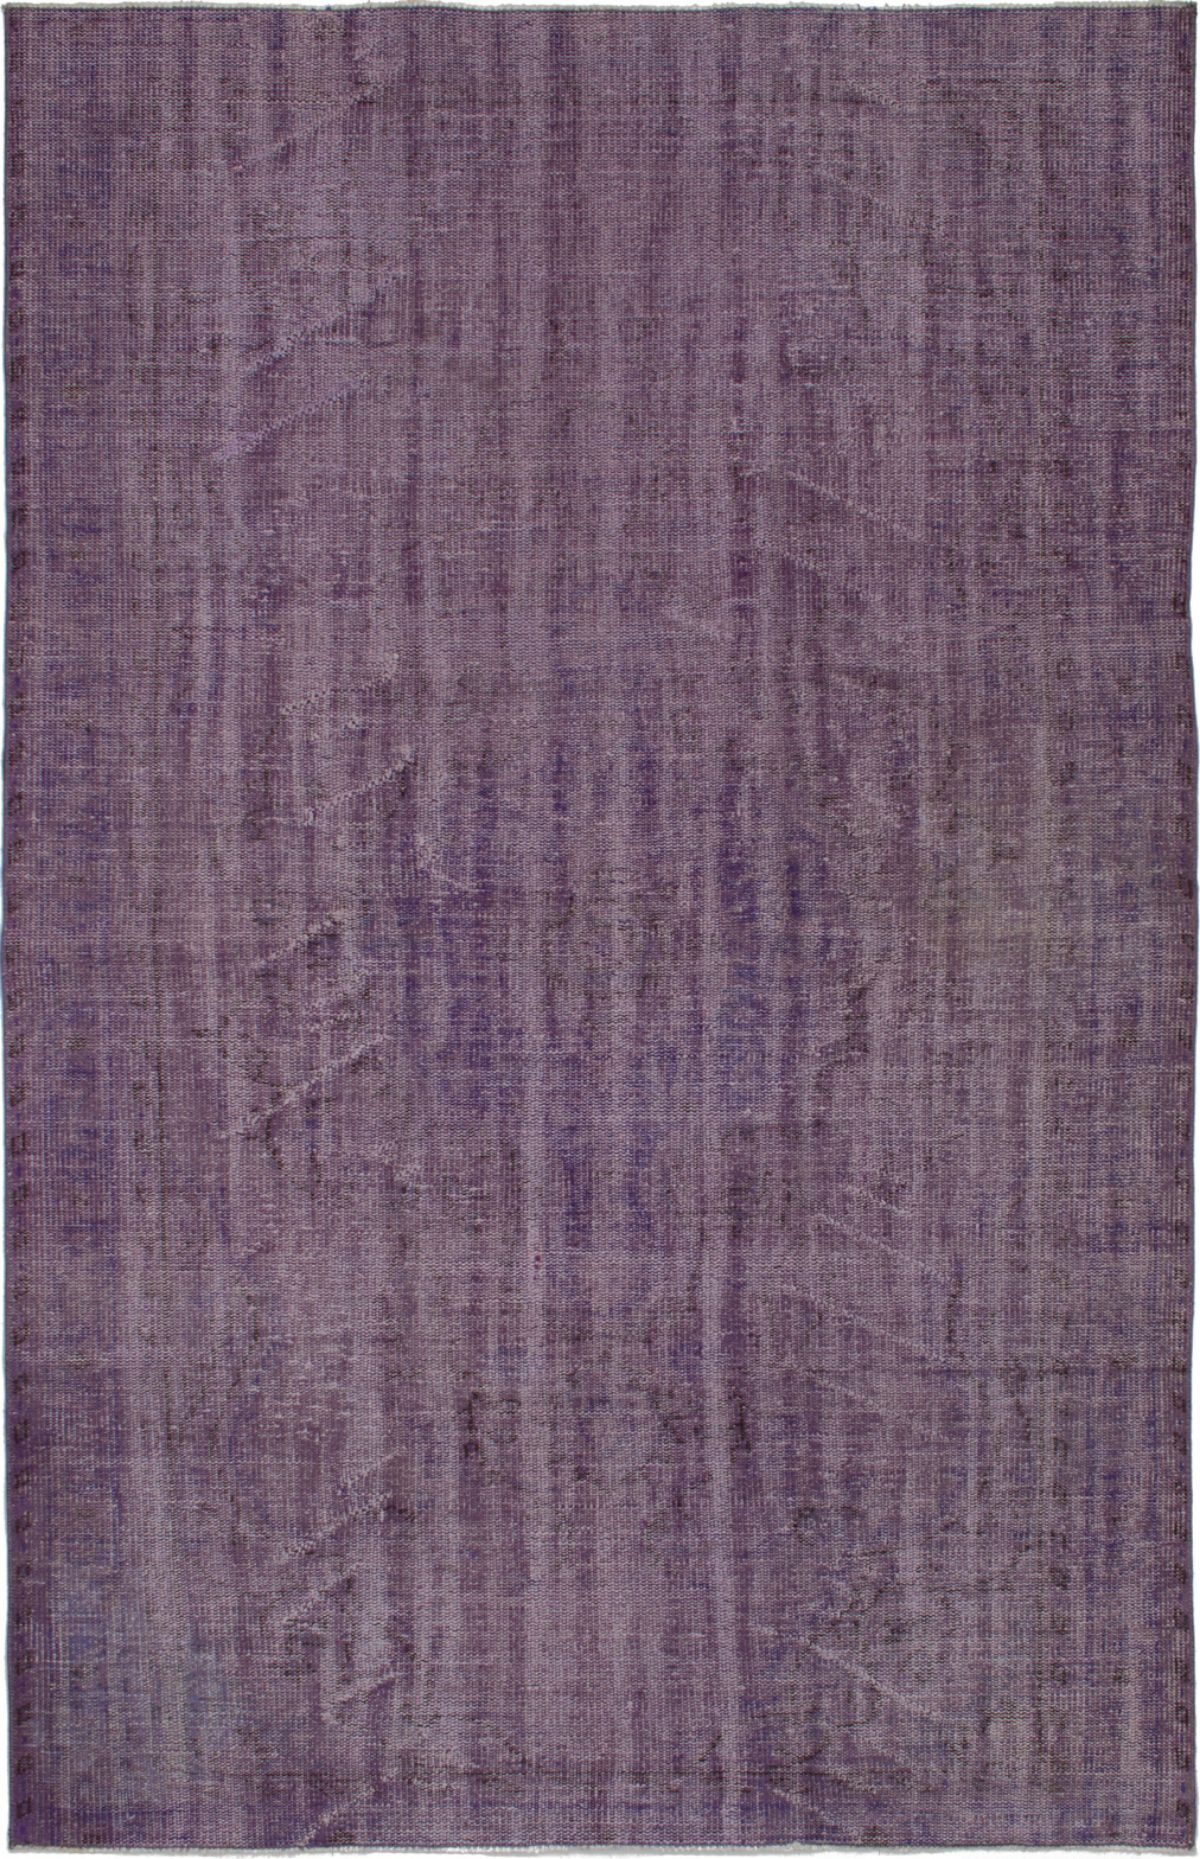 Hand-knotted Color Transition Purple Wool Rug 5'5" x 8'6"  Size: 5'5" x 8'6"  